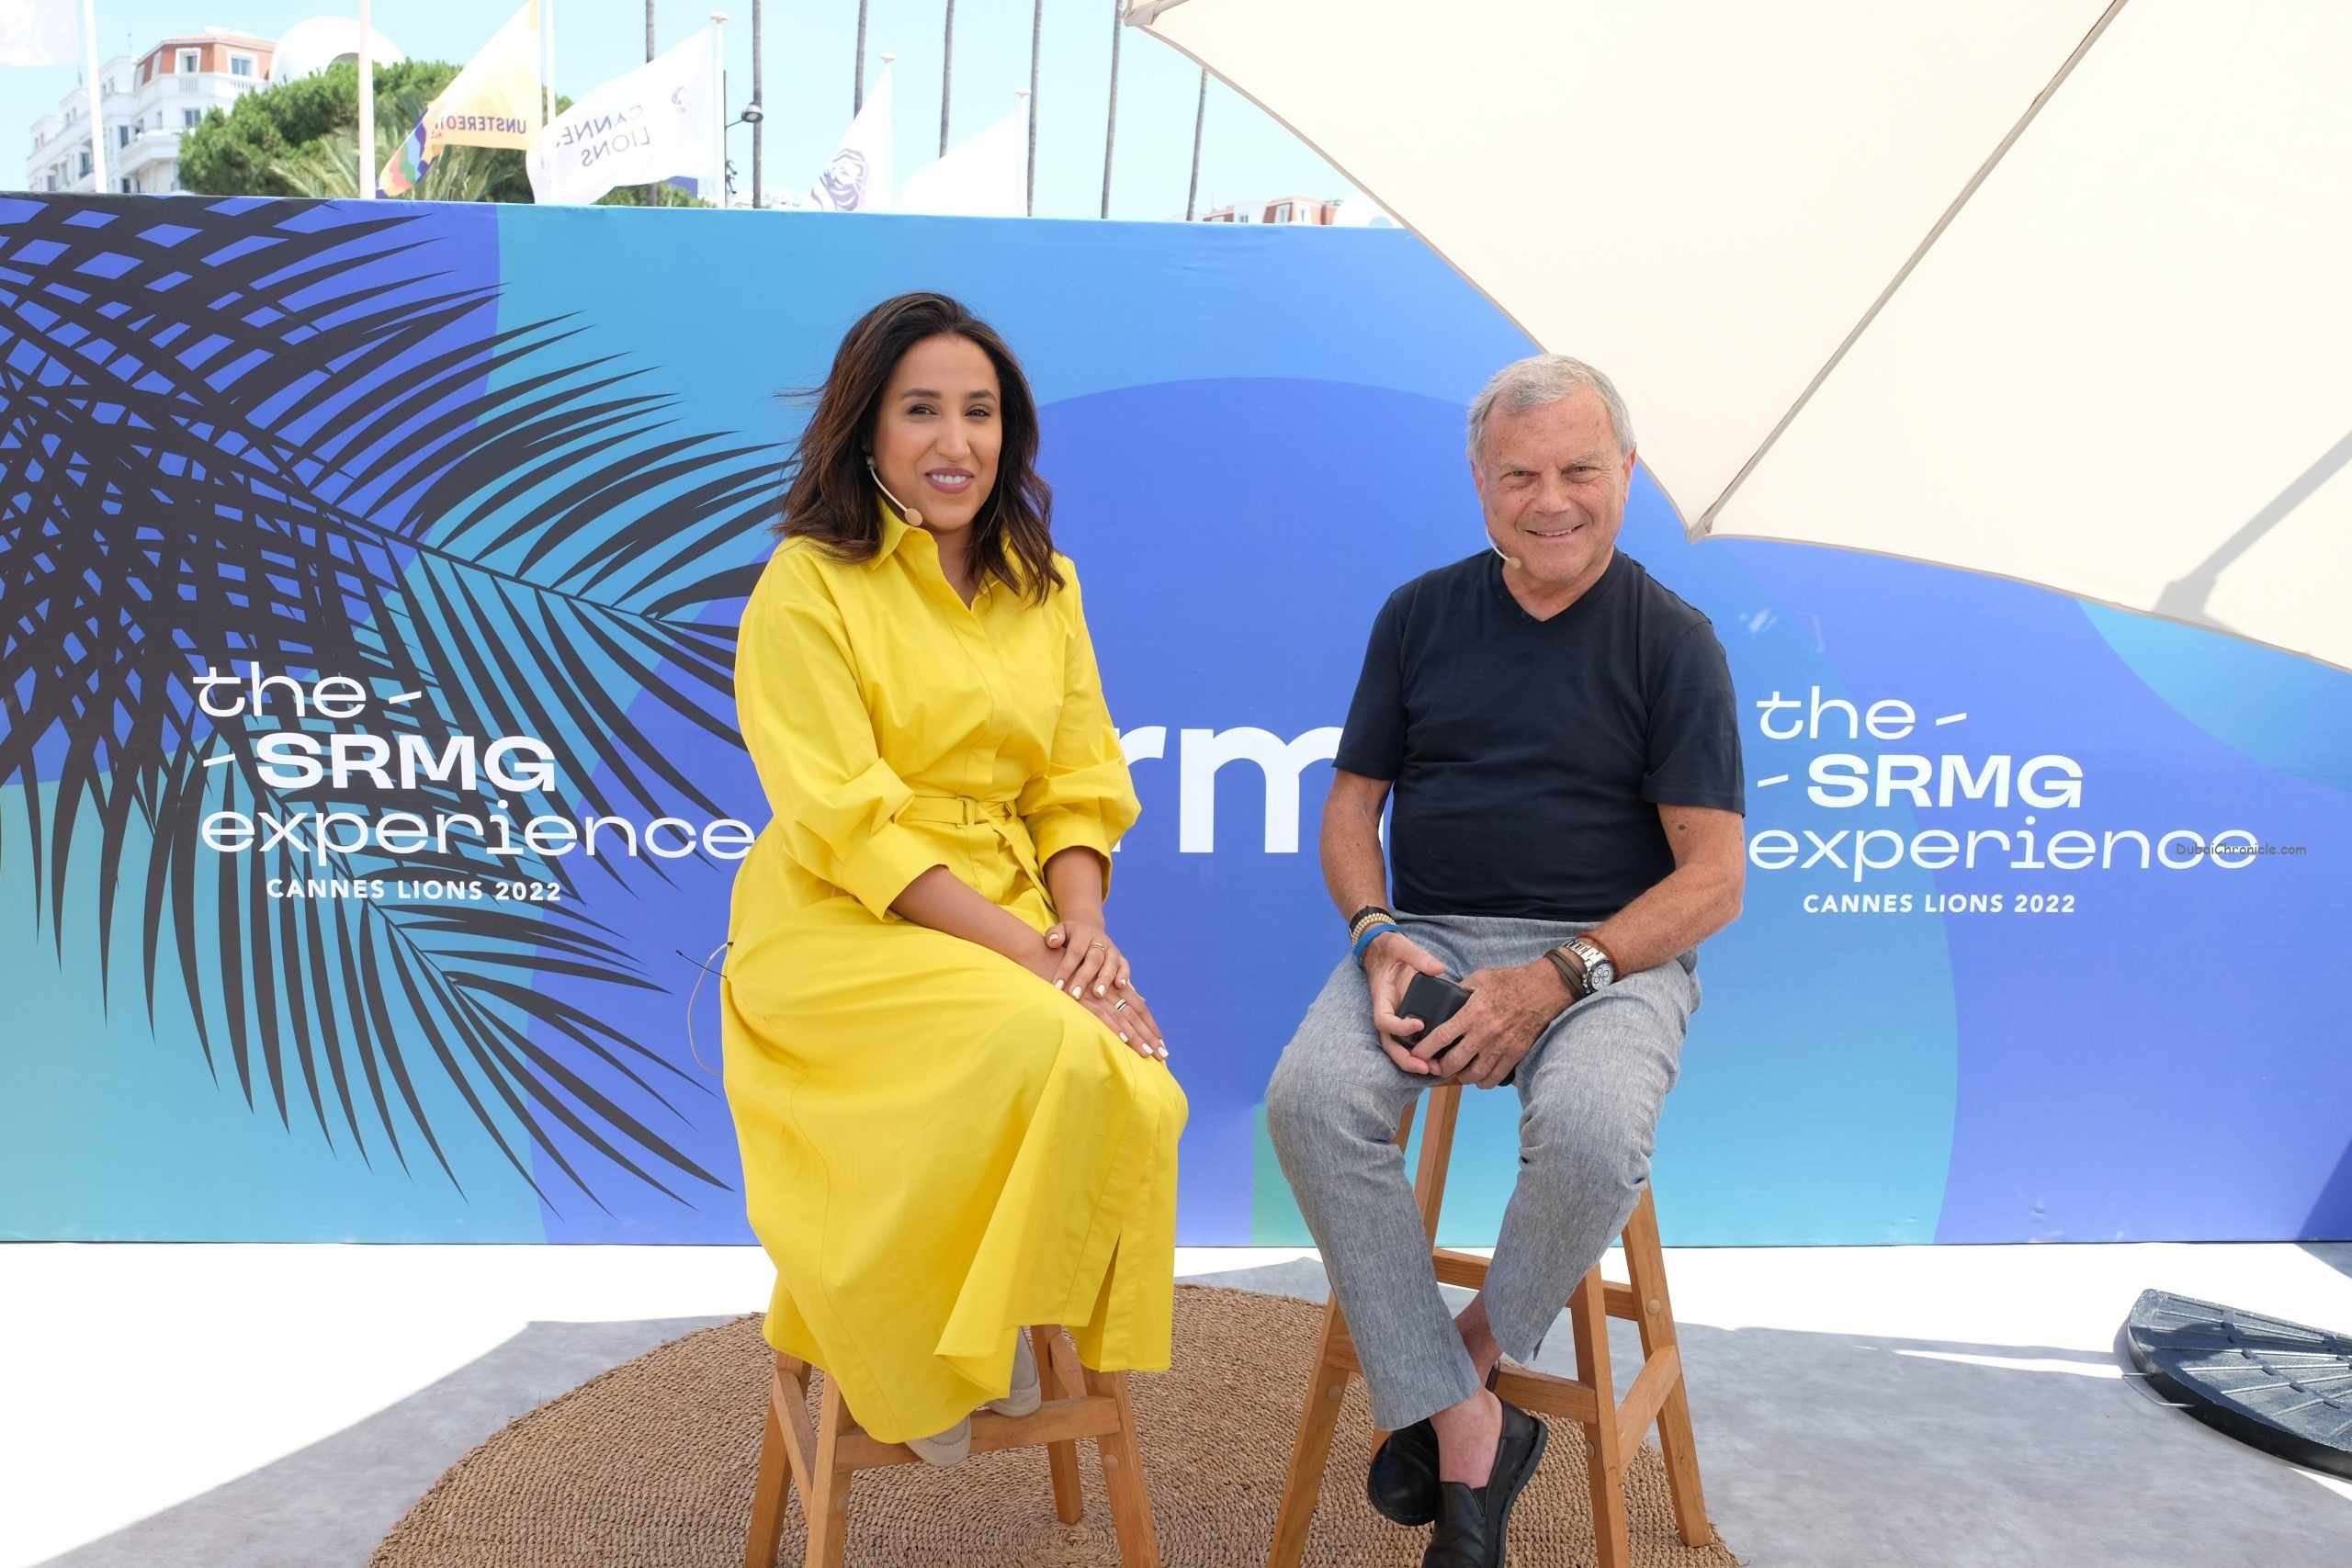 experience,srmg,exclusive,cannes,lions